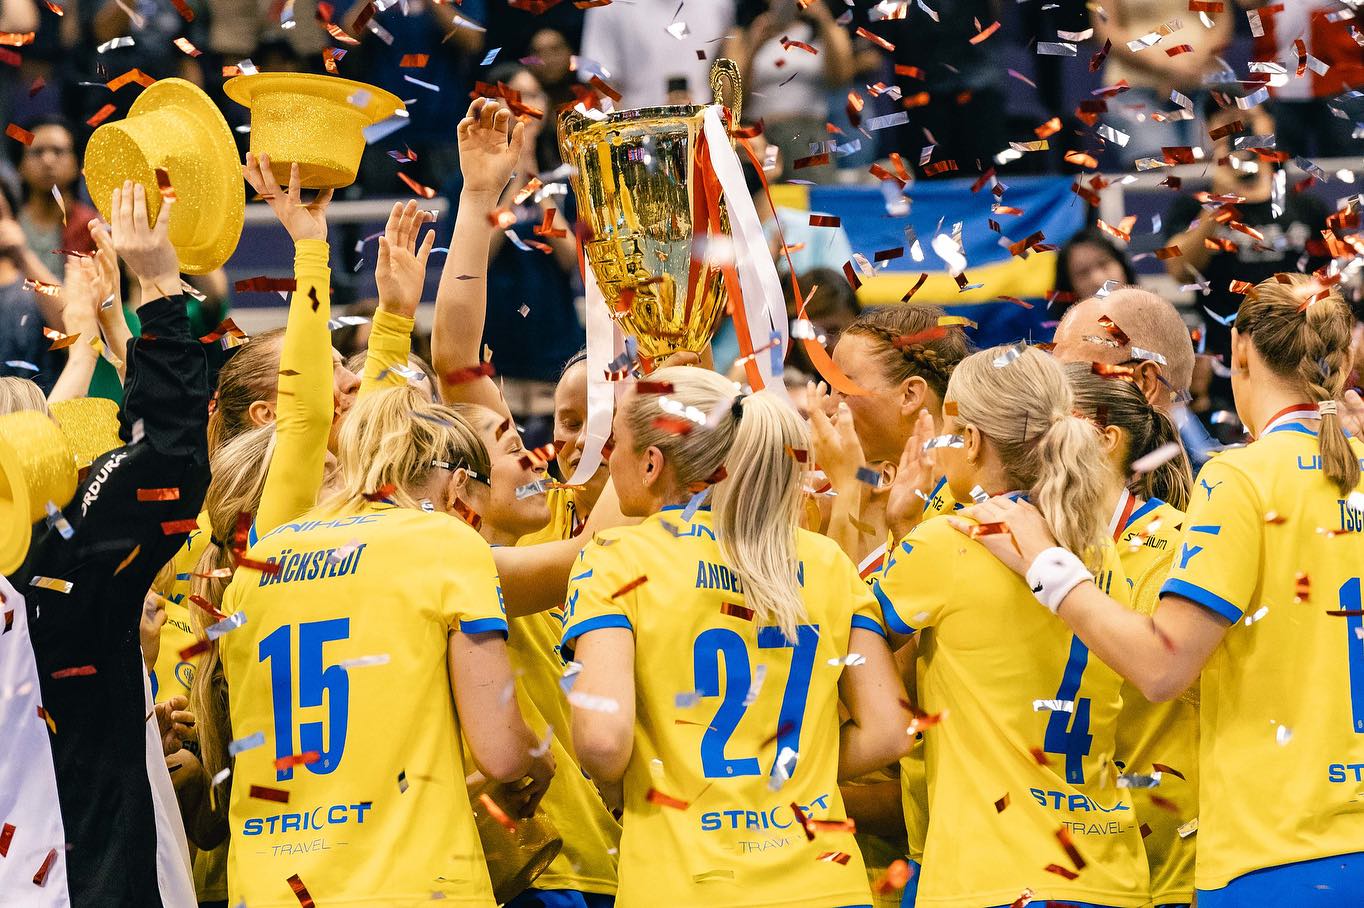 Sweden Claim 9th Straight Gold at the Women's World Floorball Championship